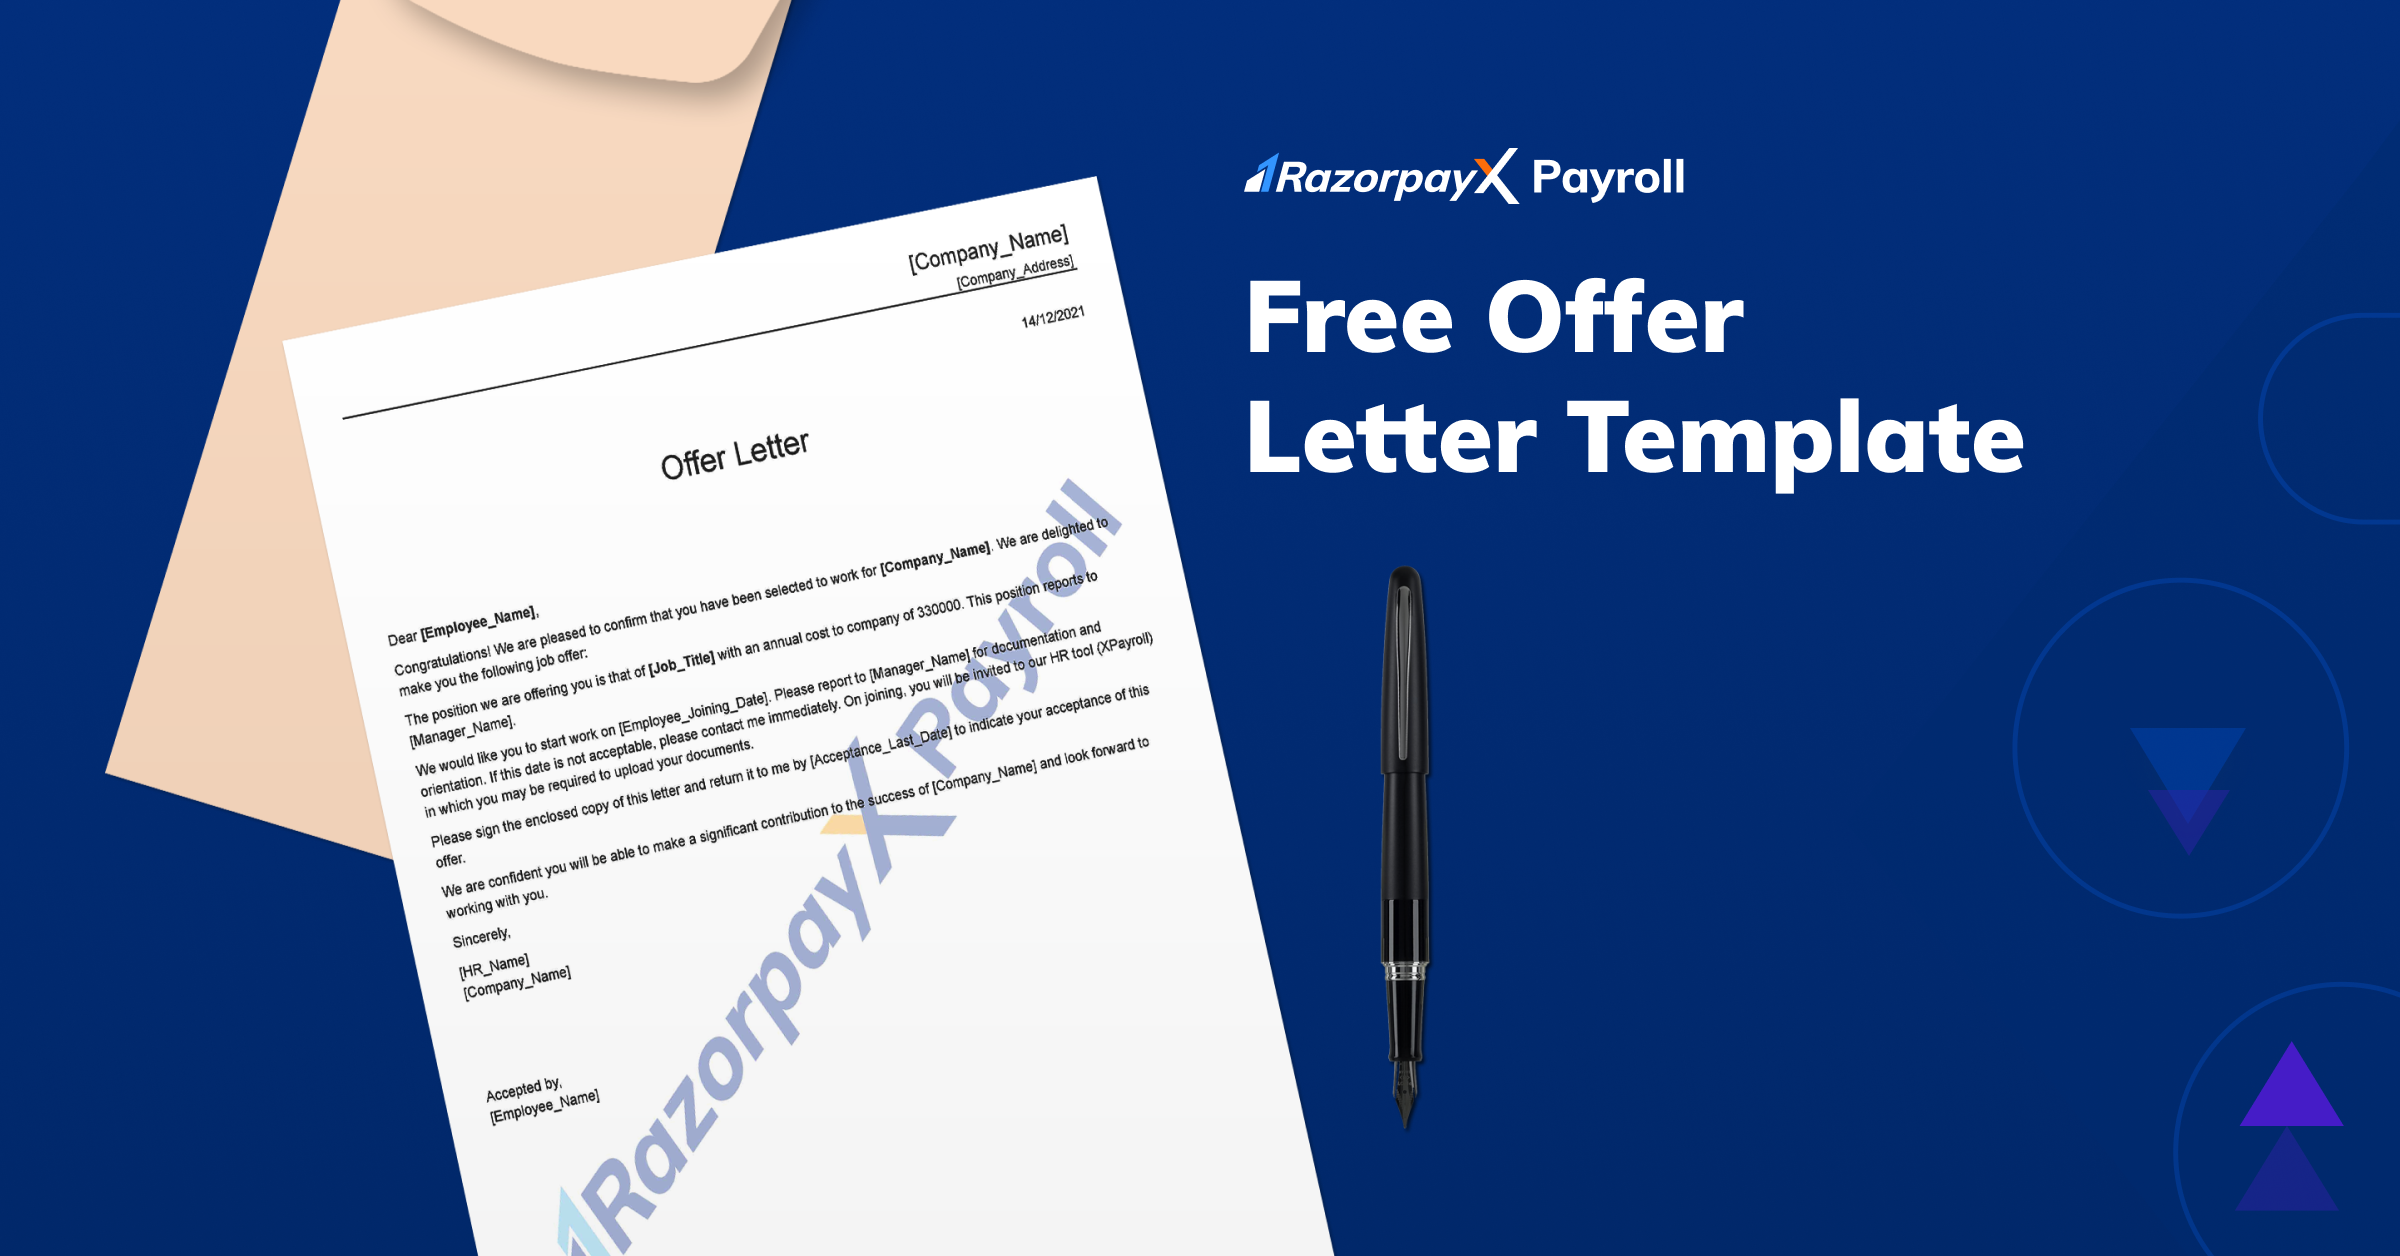 Job Offer Letter: Elements & 6 Free Templates - Razorpay Payroll